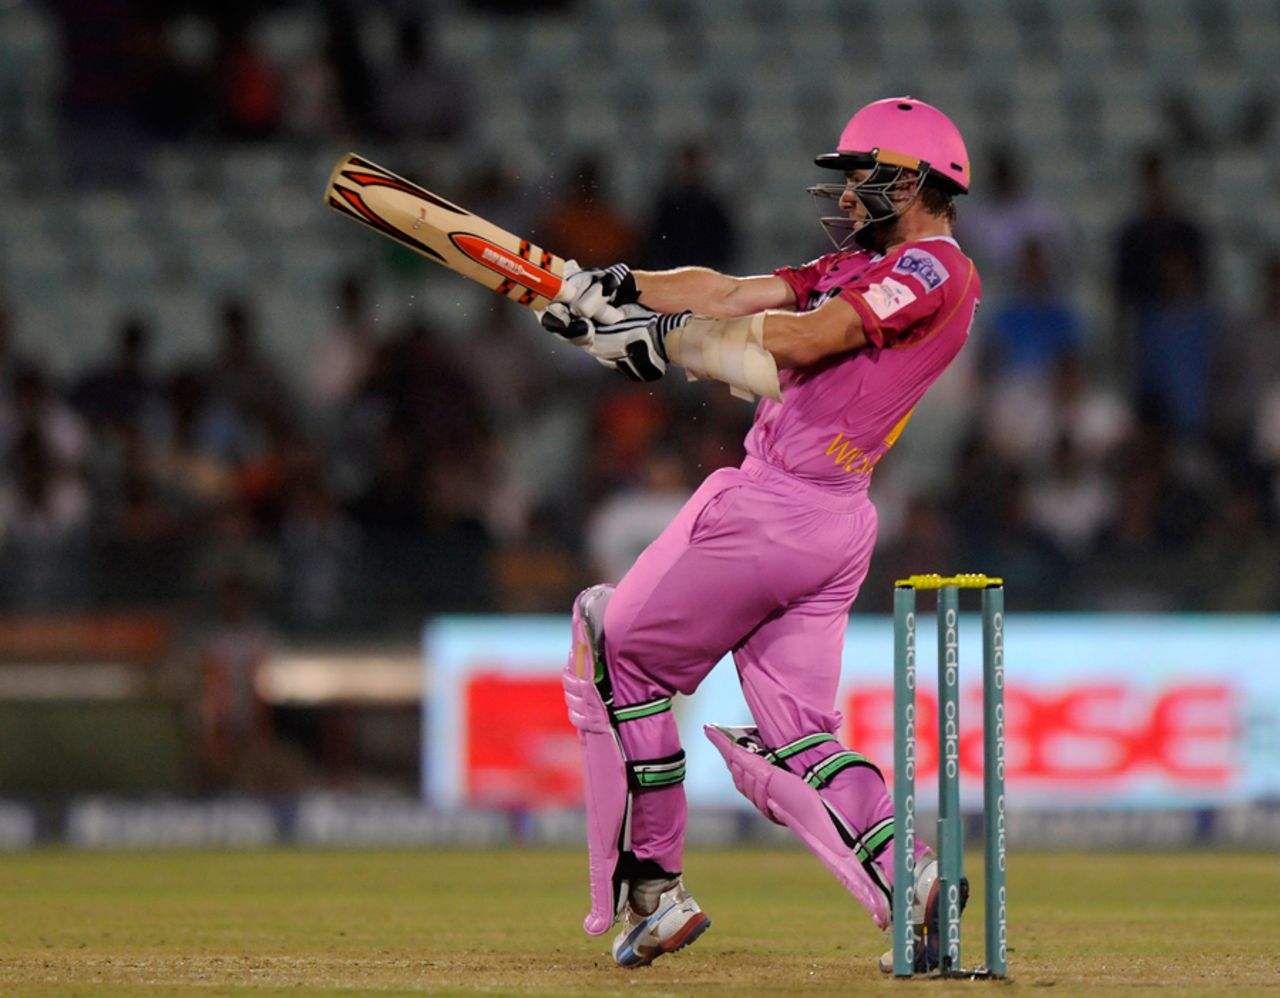 Kane Williamson's bat twists as he pulls, Cape Cobras v Northern Knights, Champions League T20, Raipur, September 19, 2014